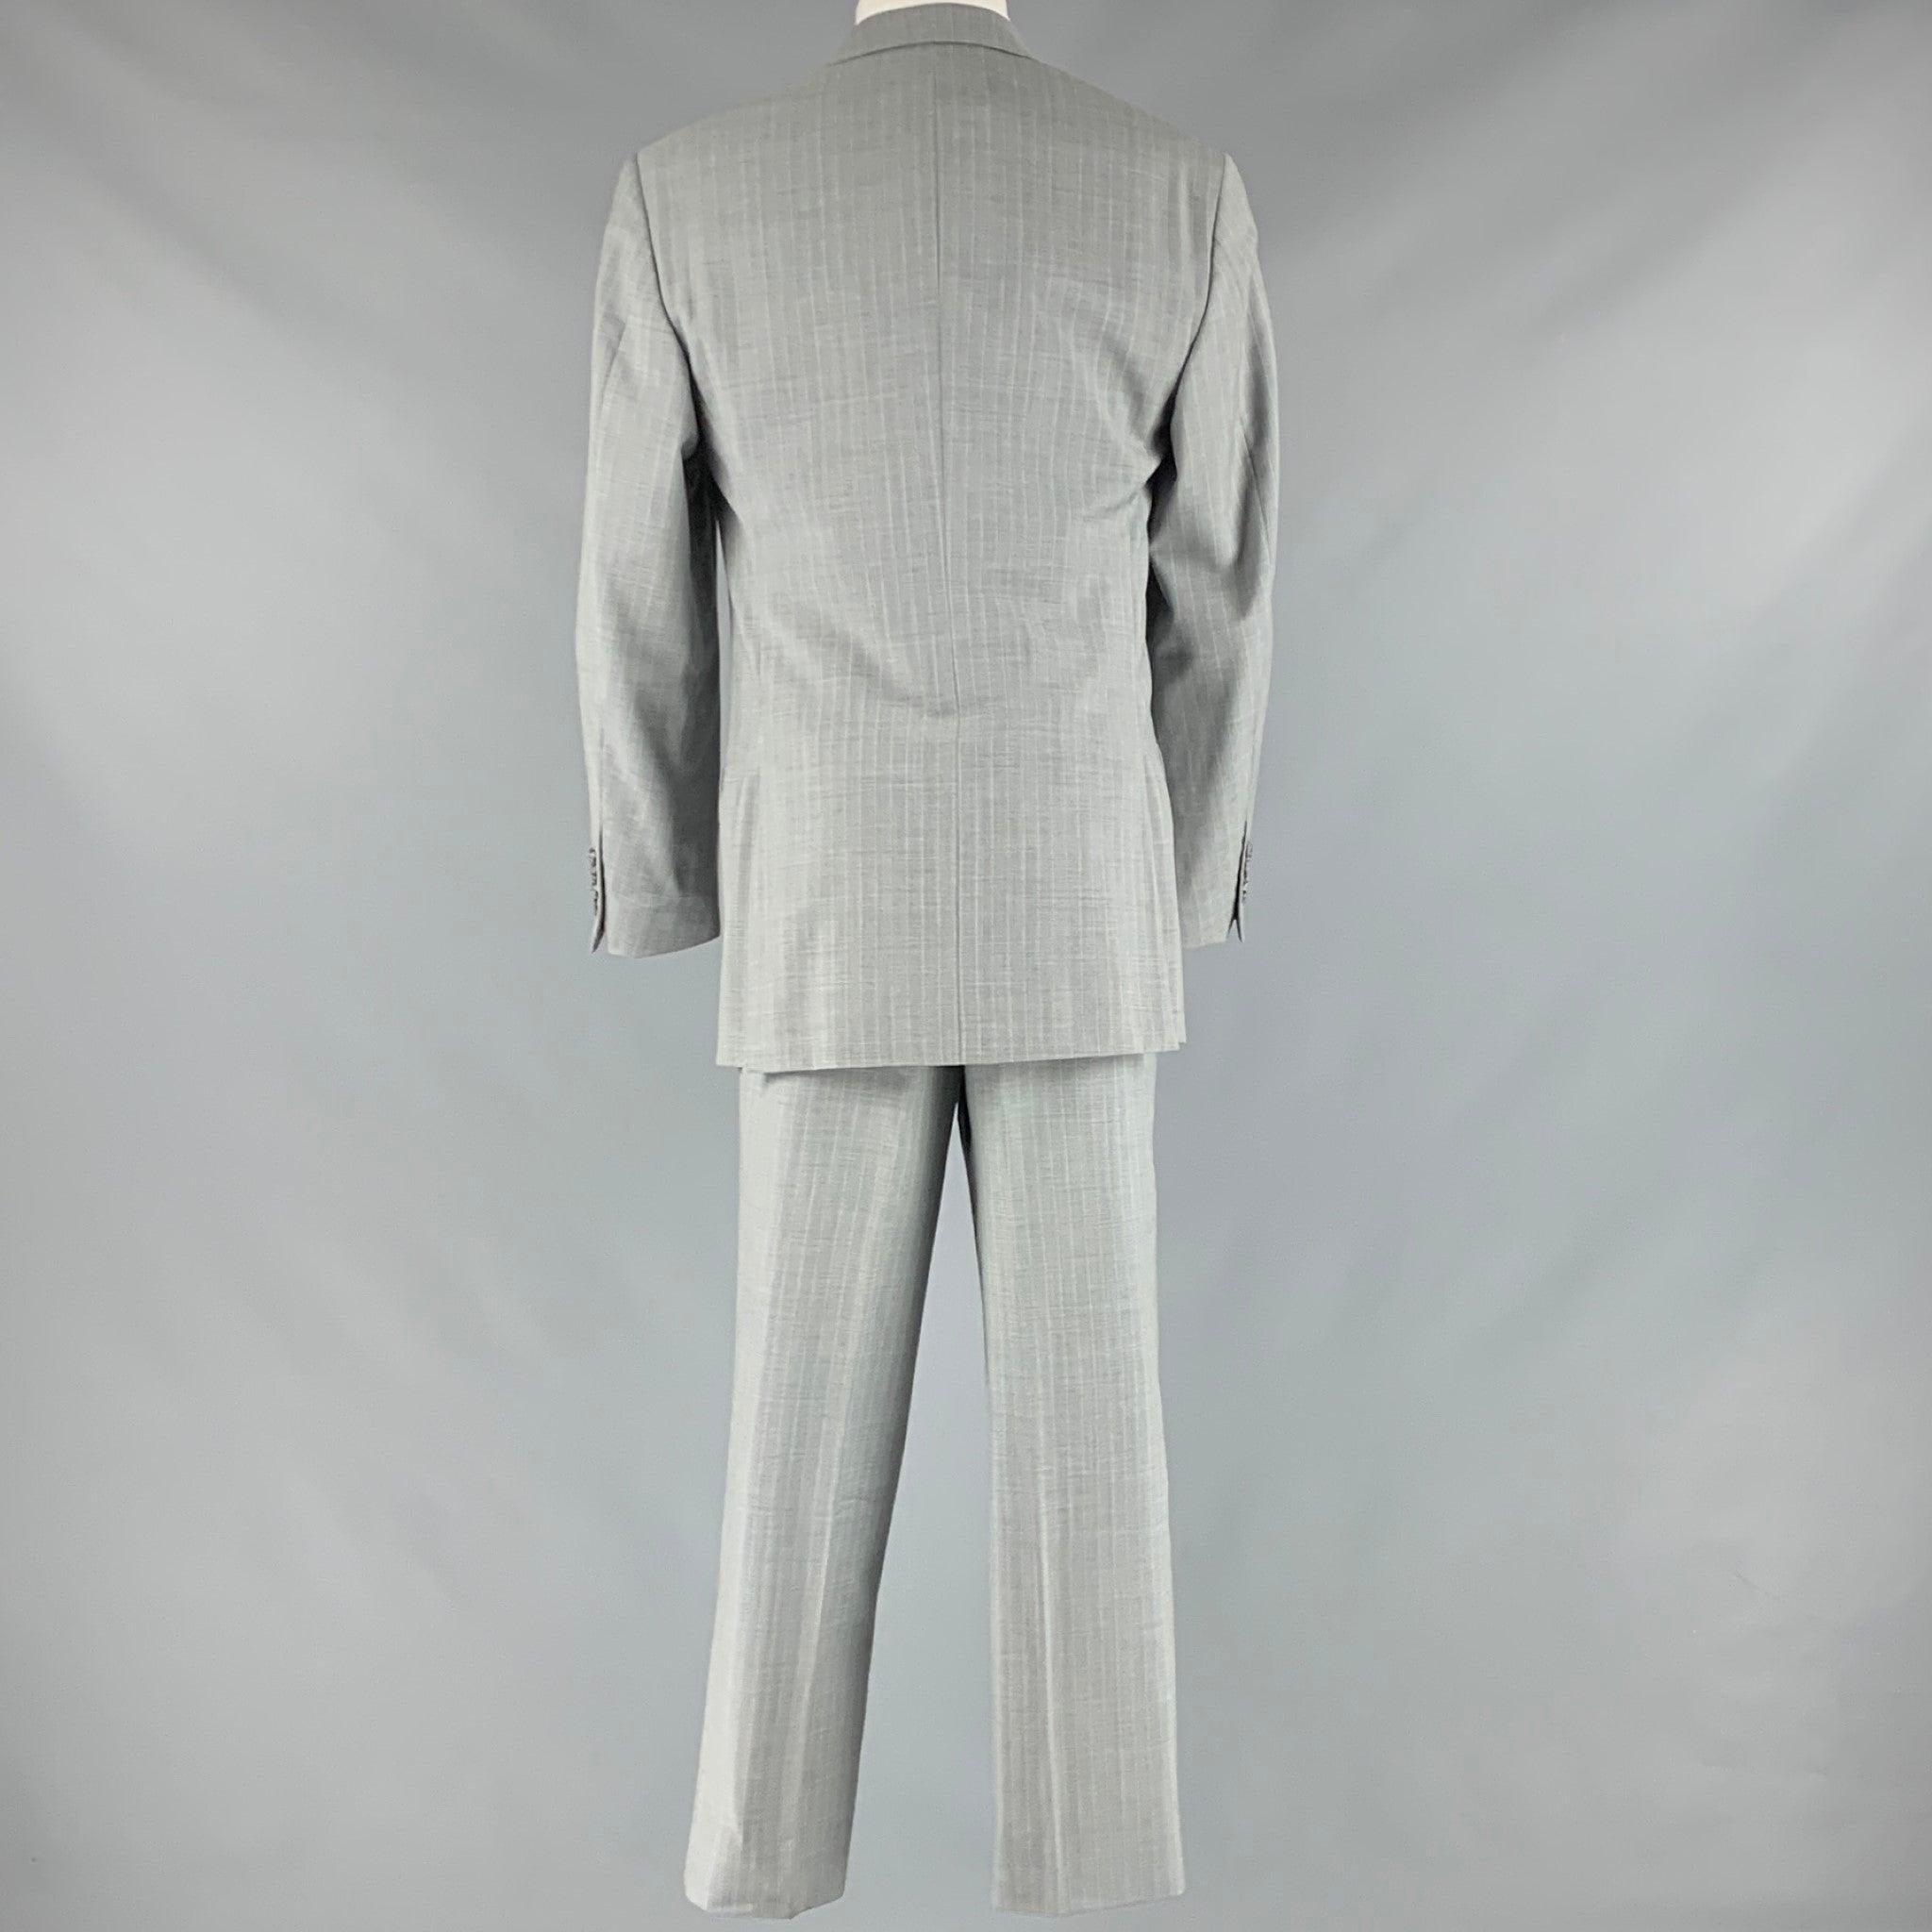 CORNELIANI Size 40 Grey Cream Pinstripe Virgin Wool Single Breasted Suit In Good Condition For Sale In San Francisco, CA